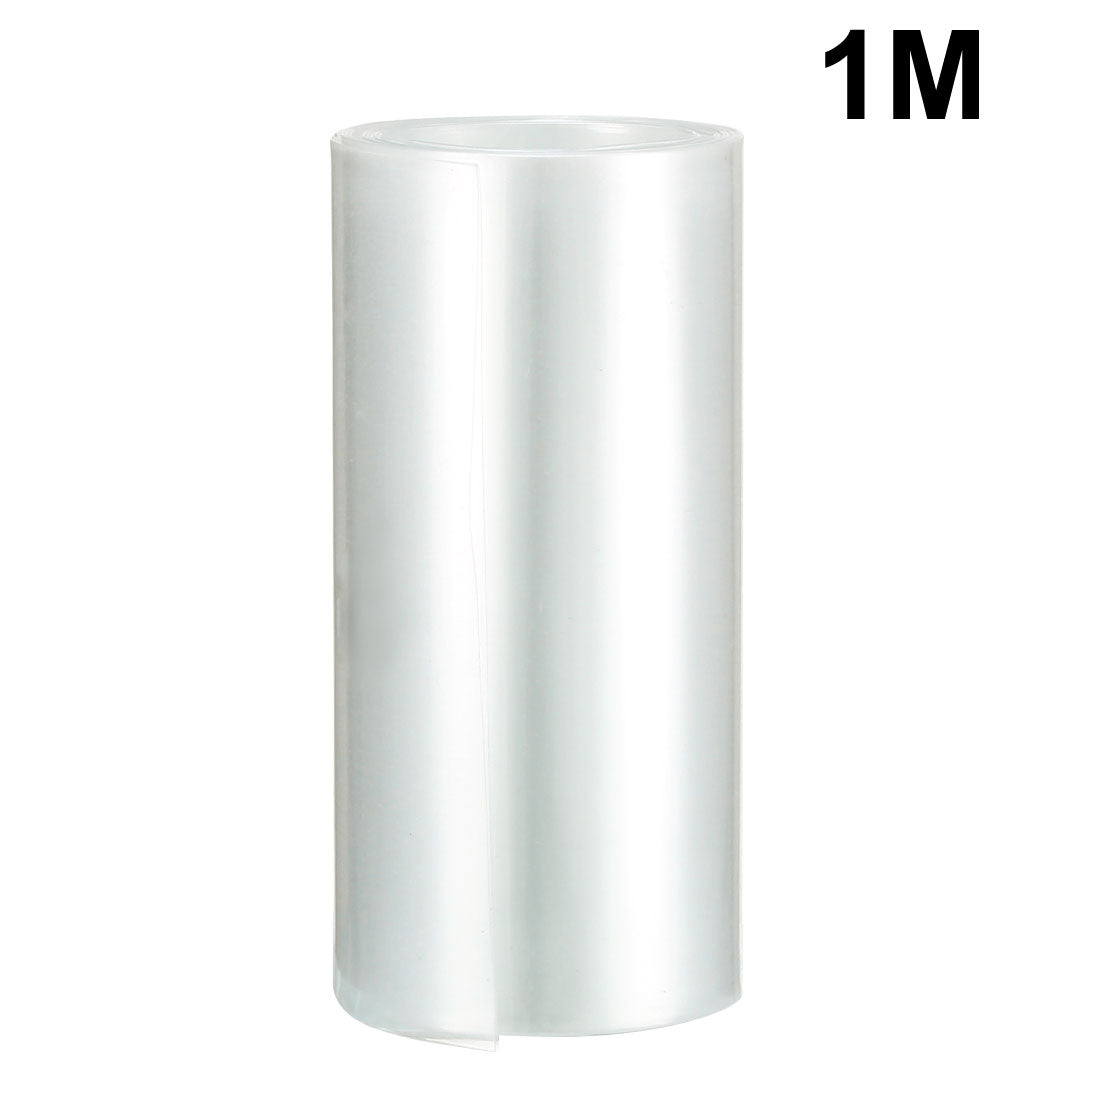 uxcell Uxcell PVC Heat Shrink Tubing 85mm Flat Width Heat Shrink Wrap Tube for 18650 Power Supplies 1 Meter Length, Clear